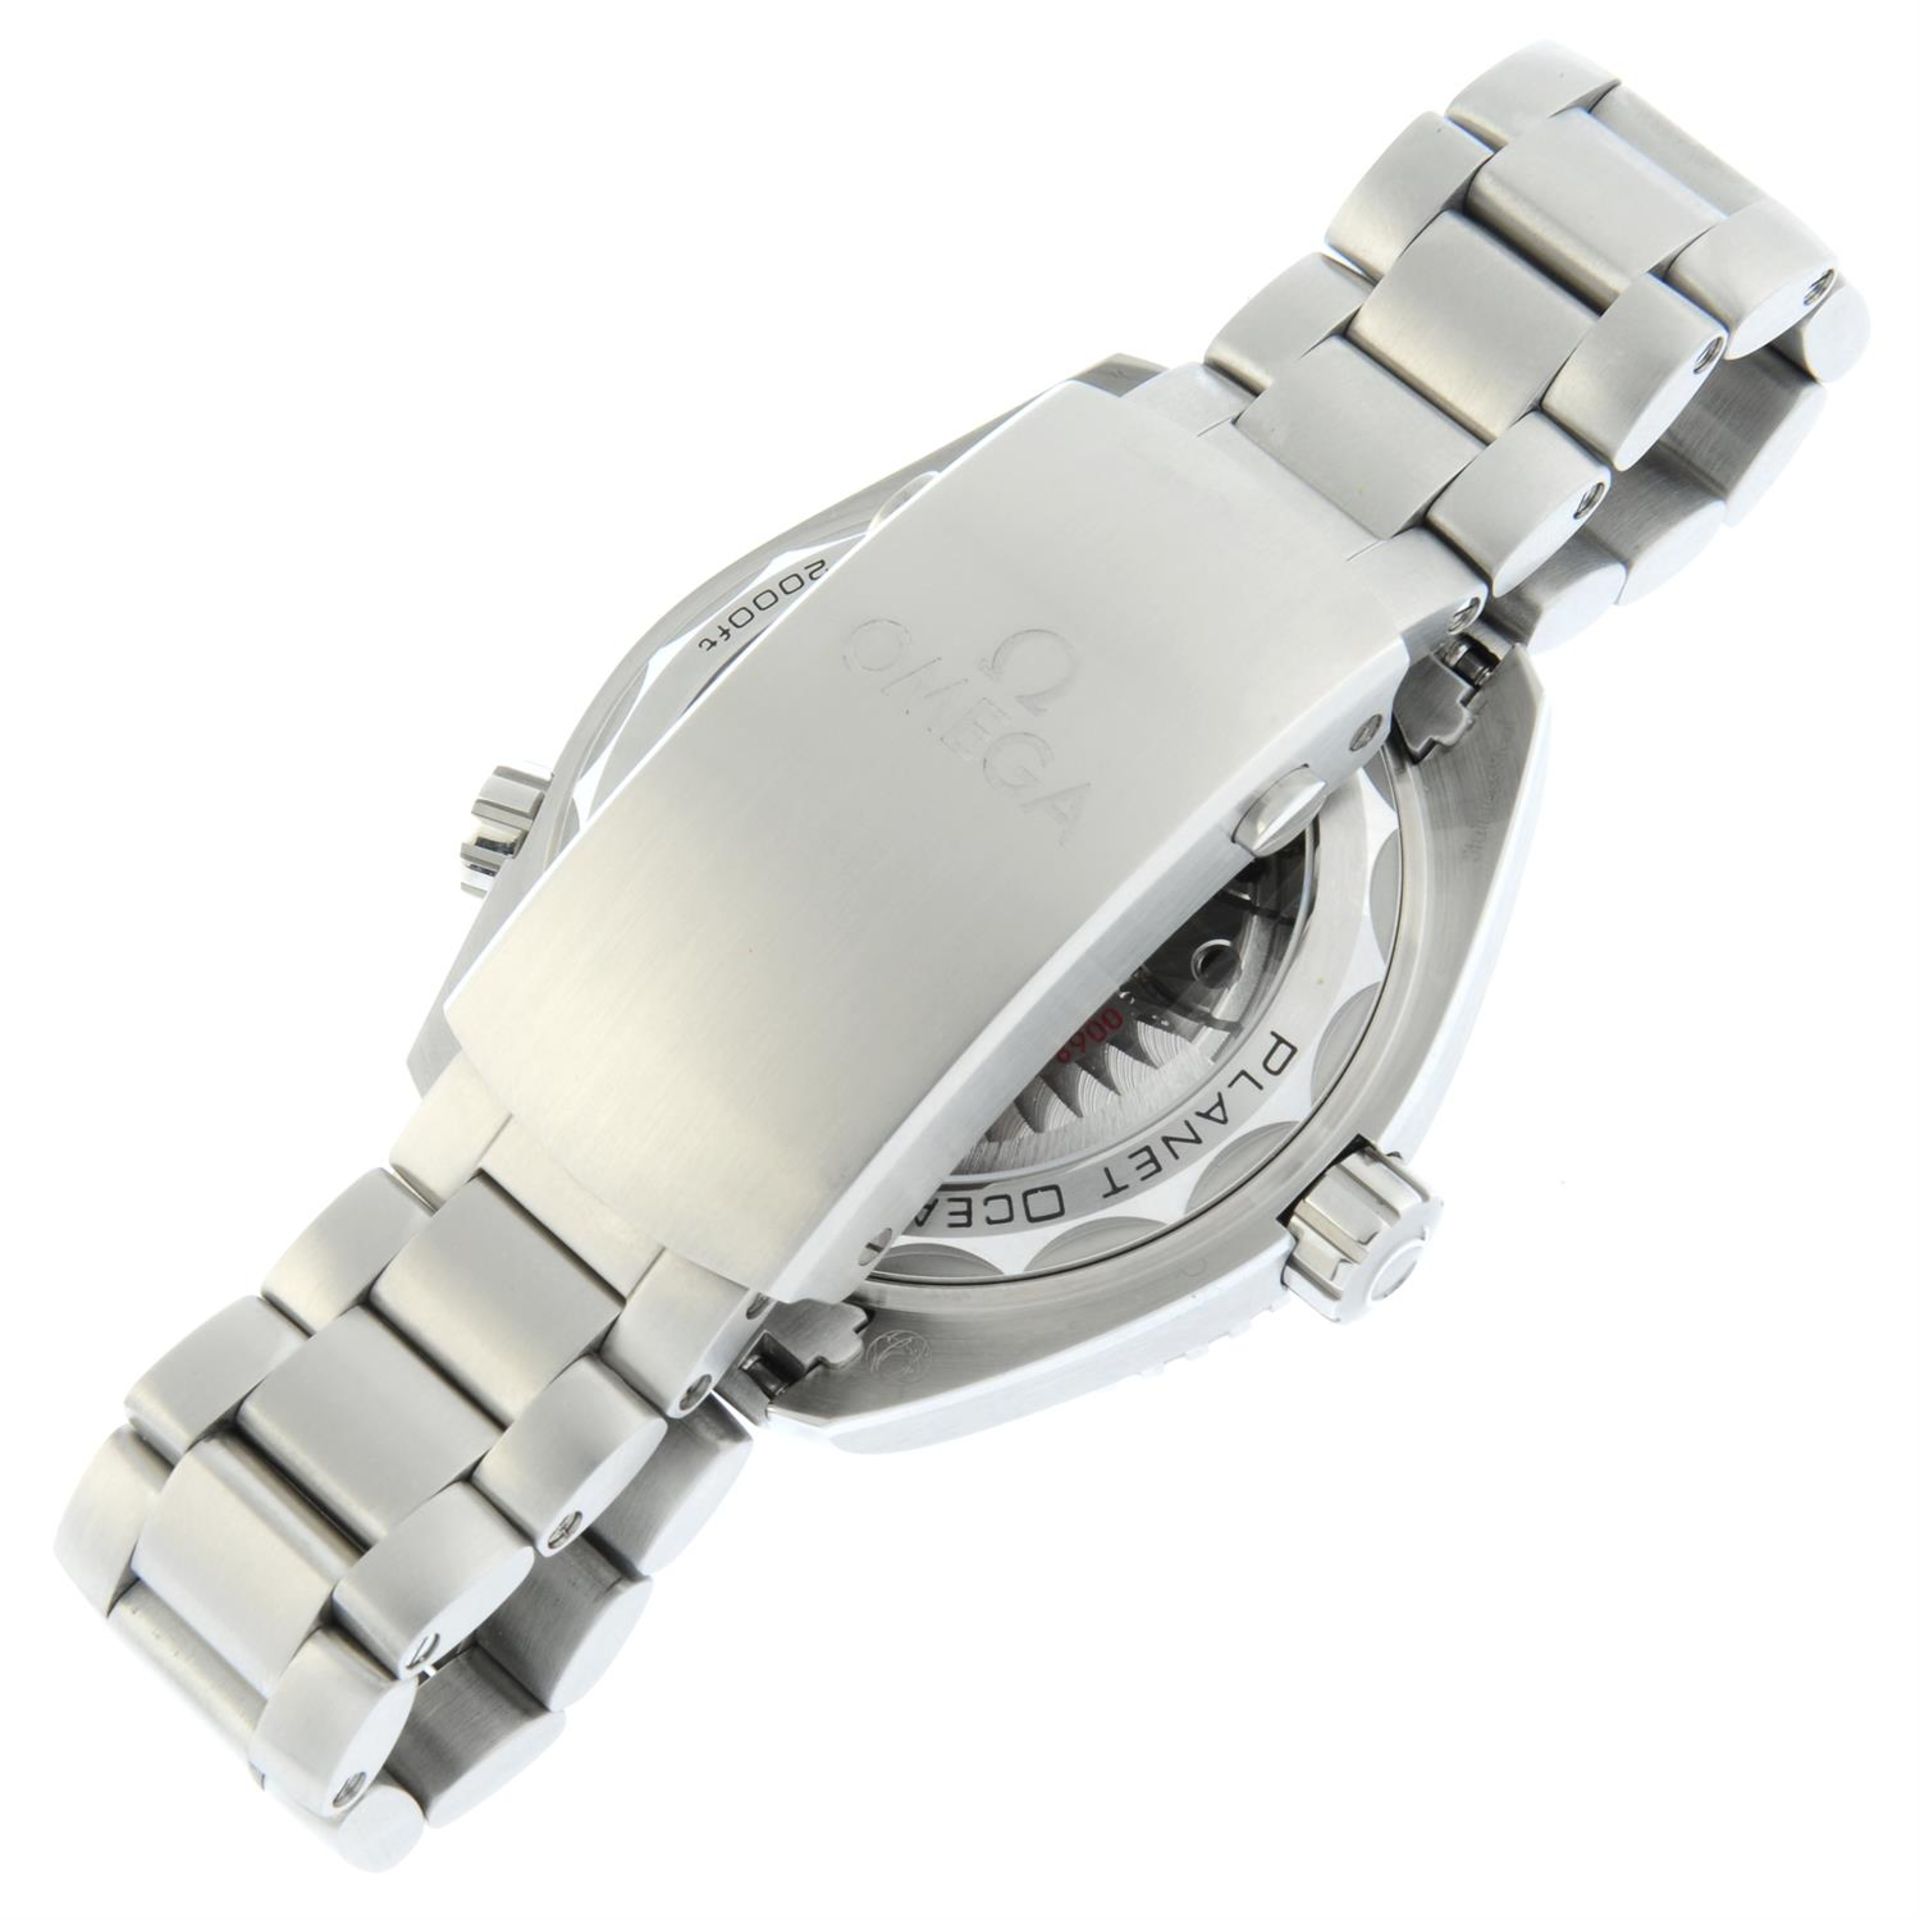 Omega - a Seamaster Planet Ocean Co-Axial bracelet watch, 44mm. - Image 2 of 7